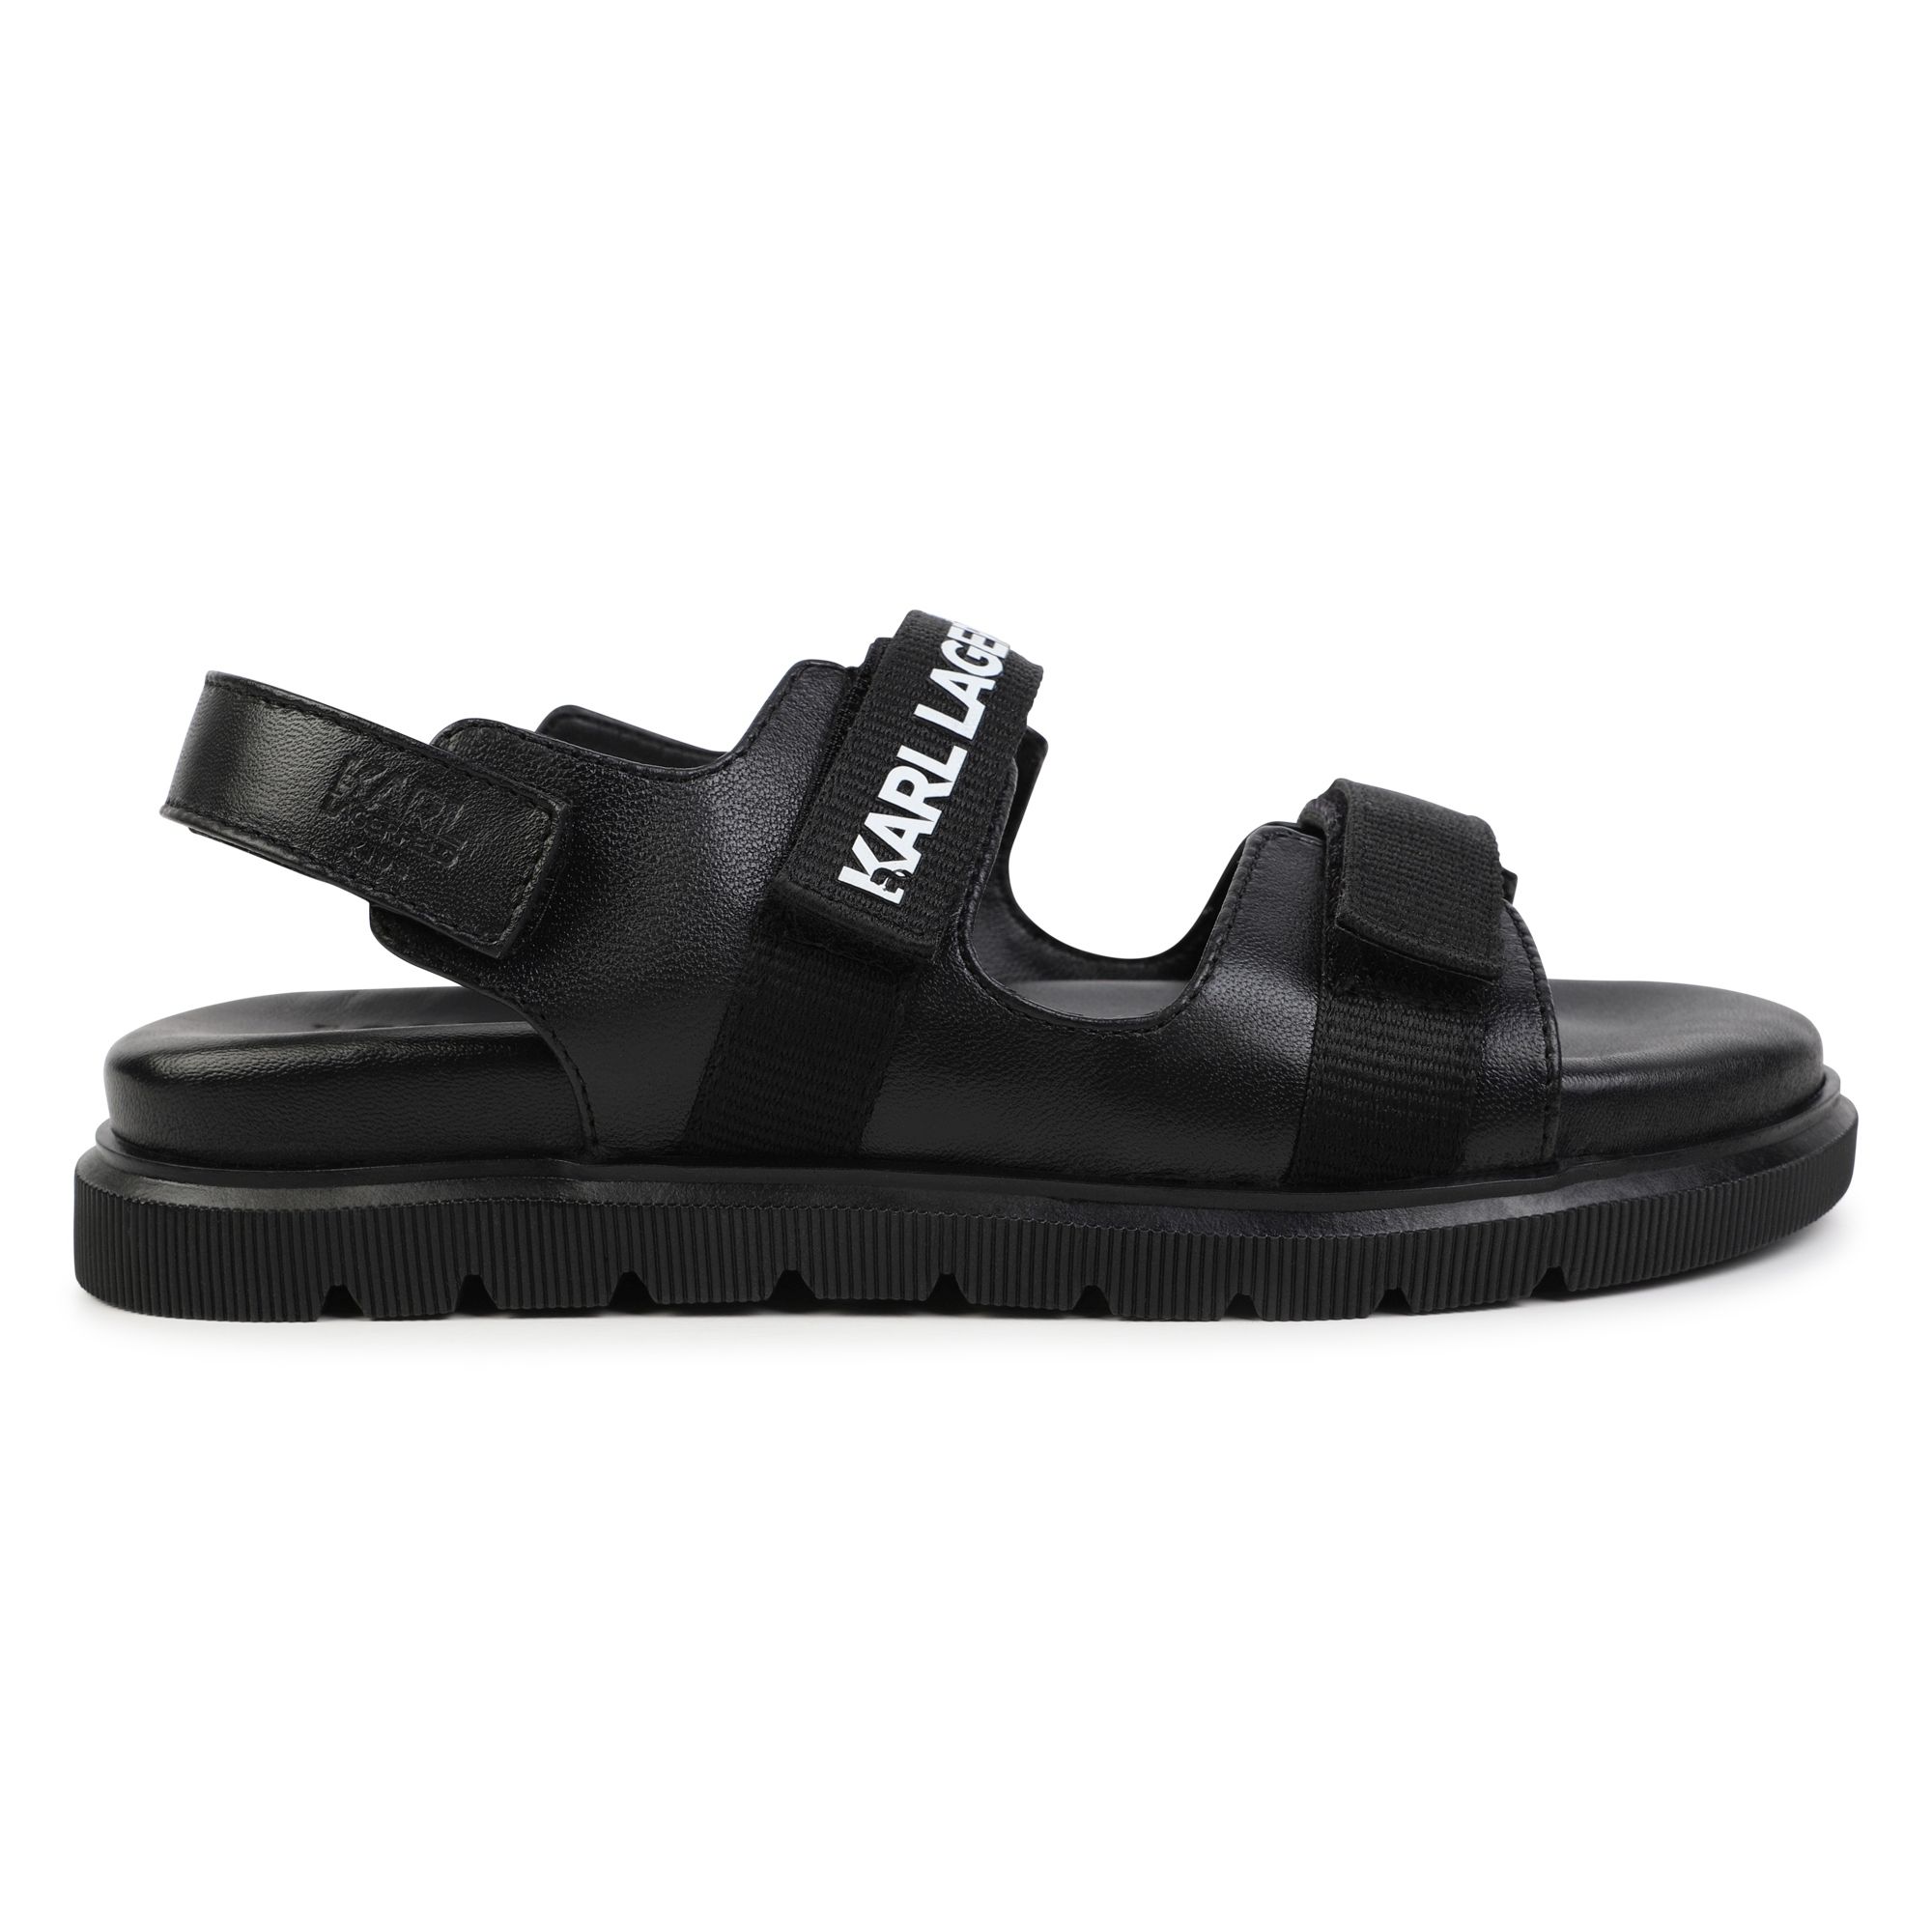 Hook-and-loop leather sandals KARL LAGERFELD KIDS for BOY